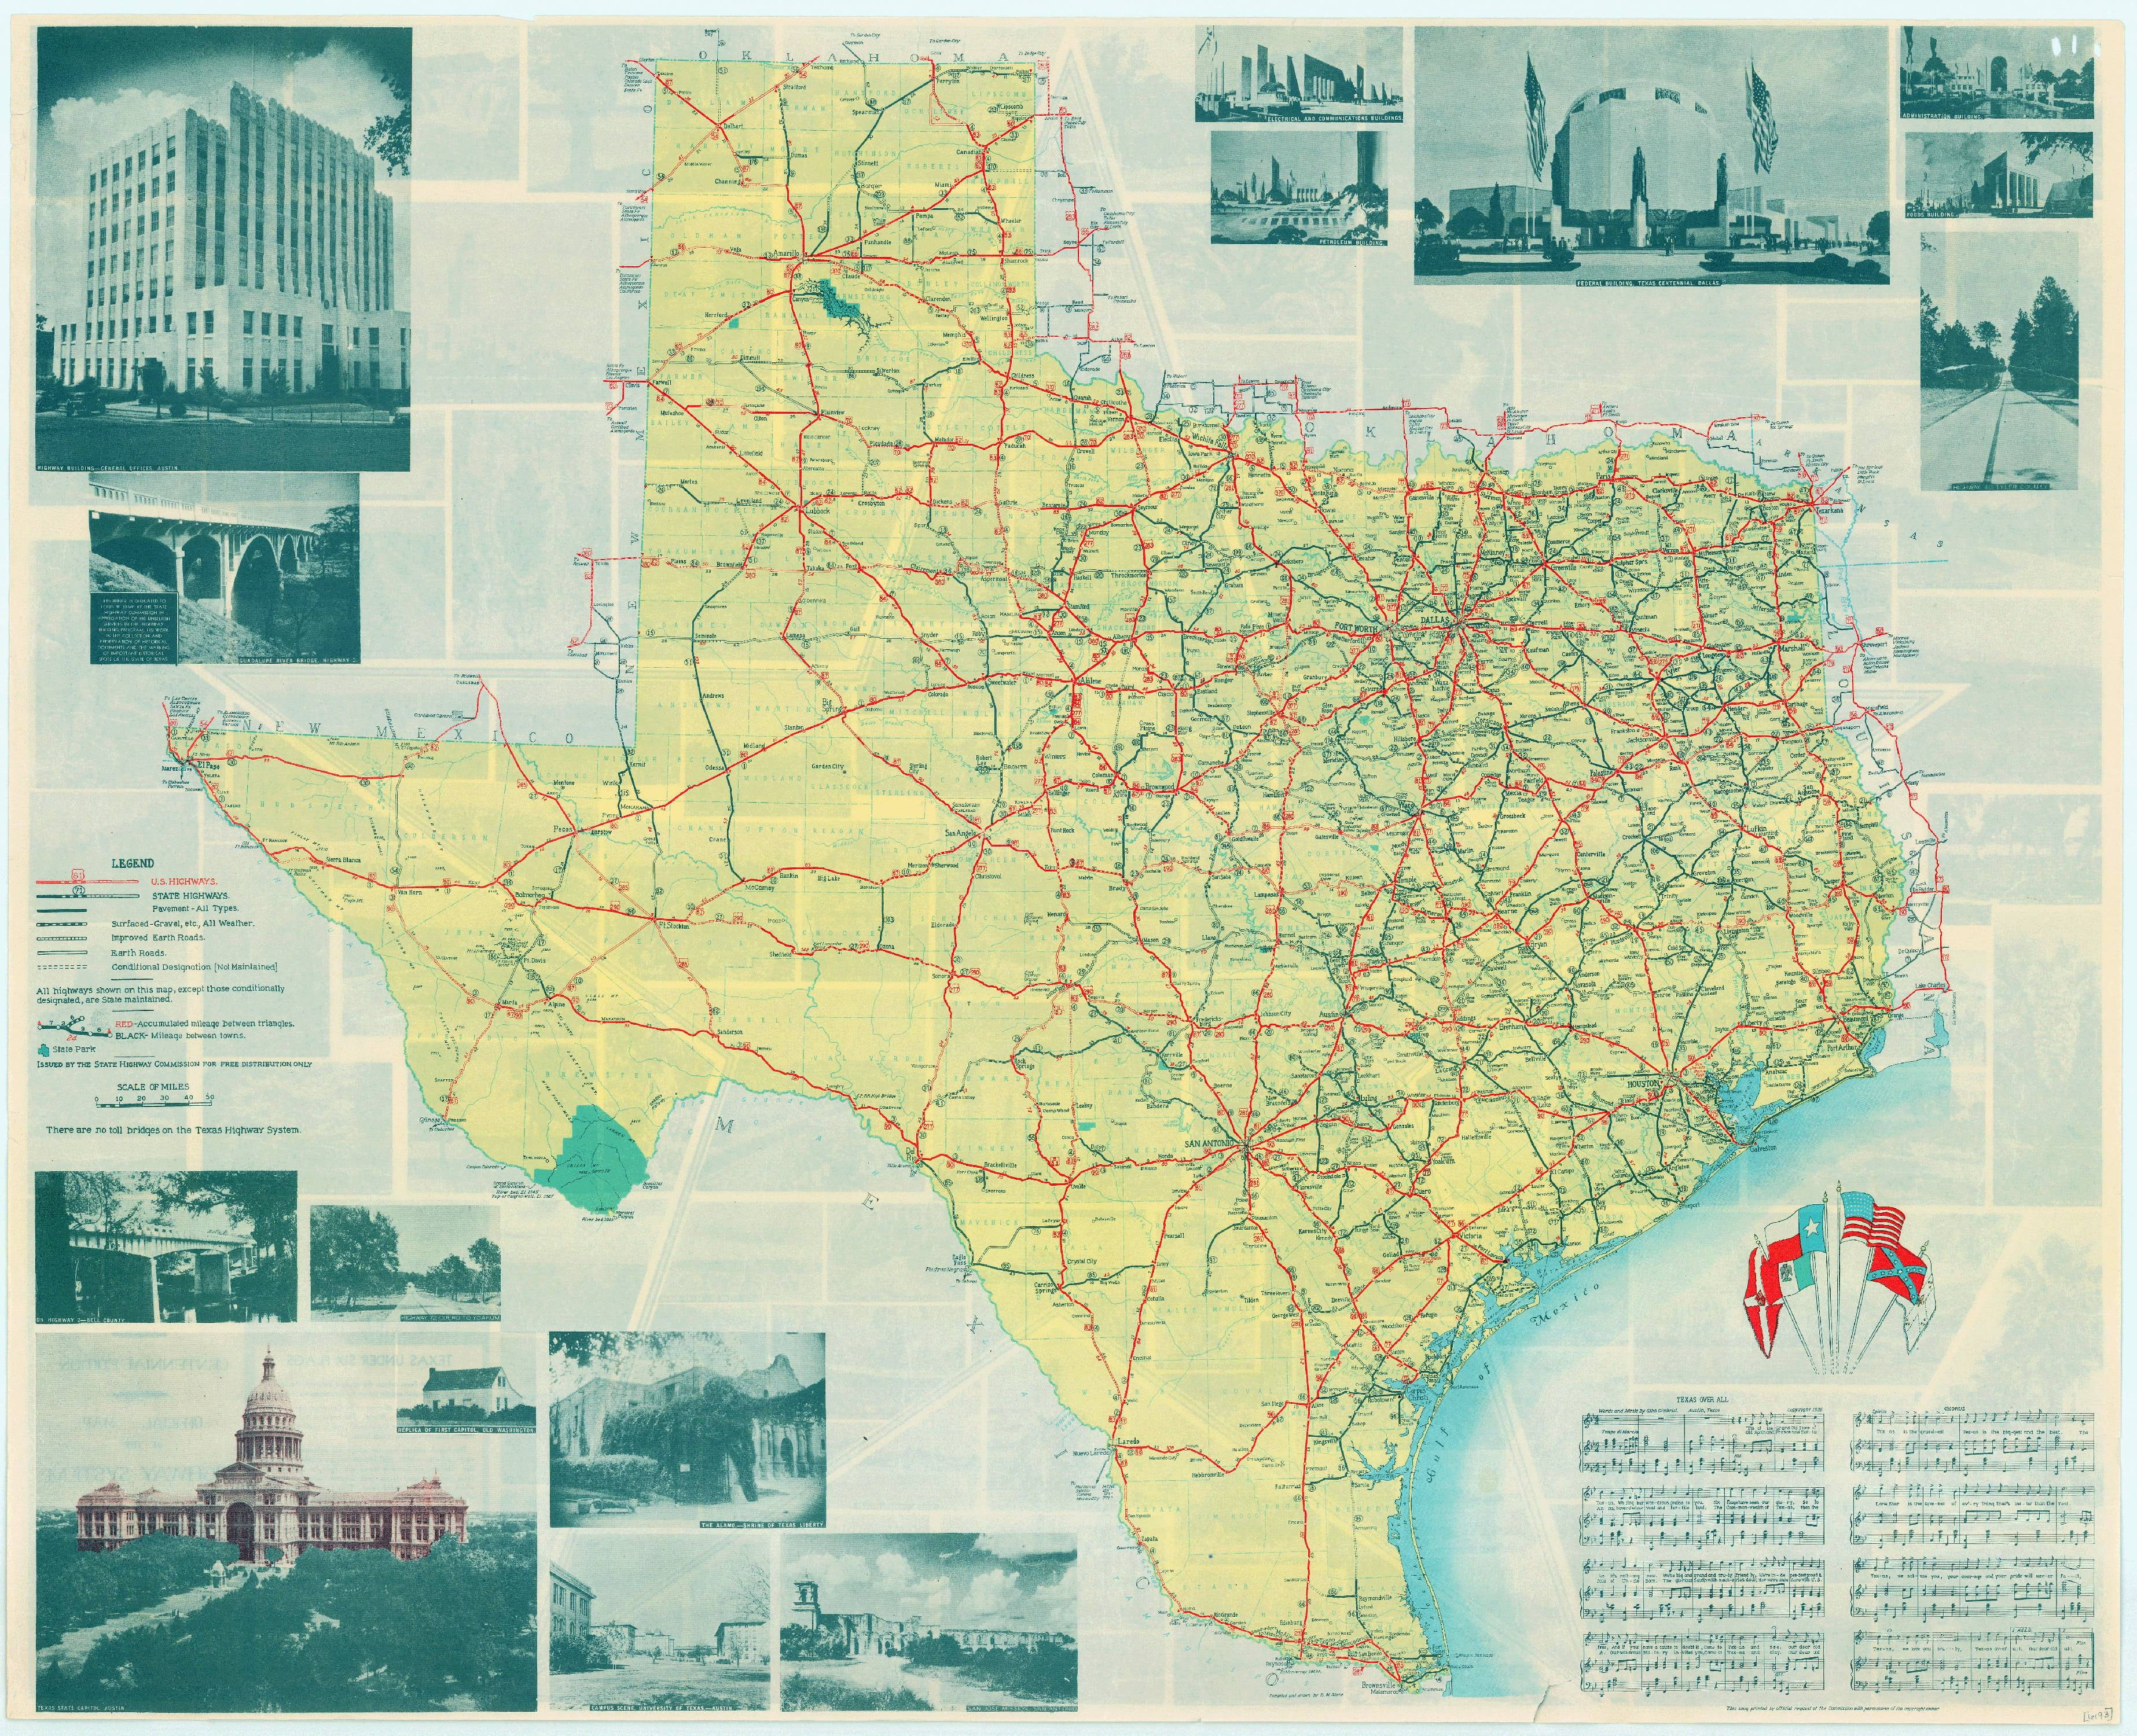 texas highways travel guide